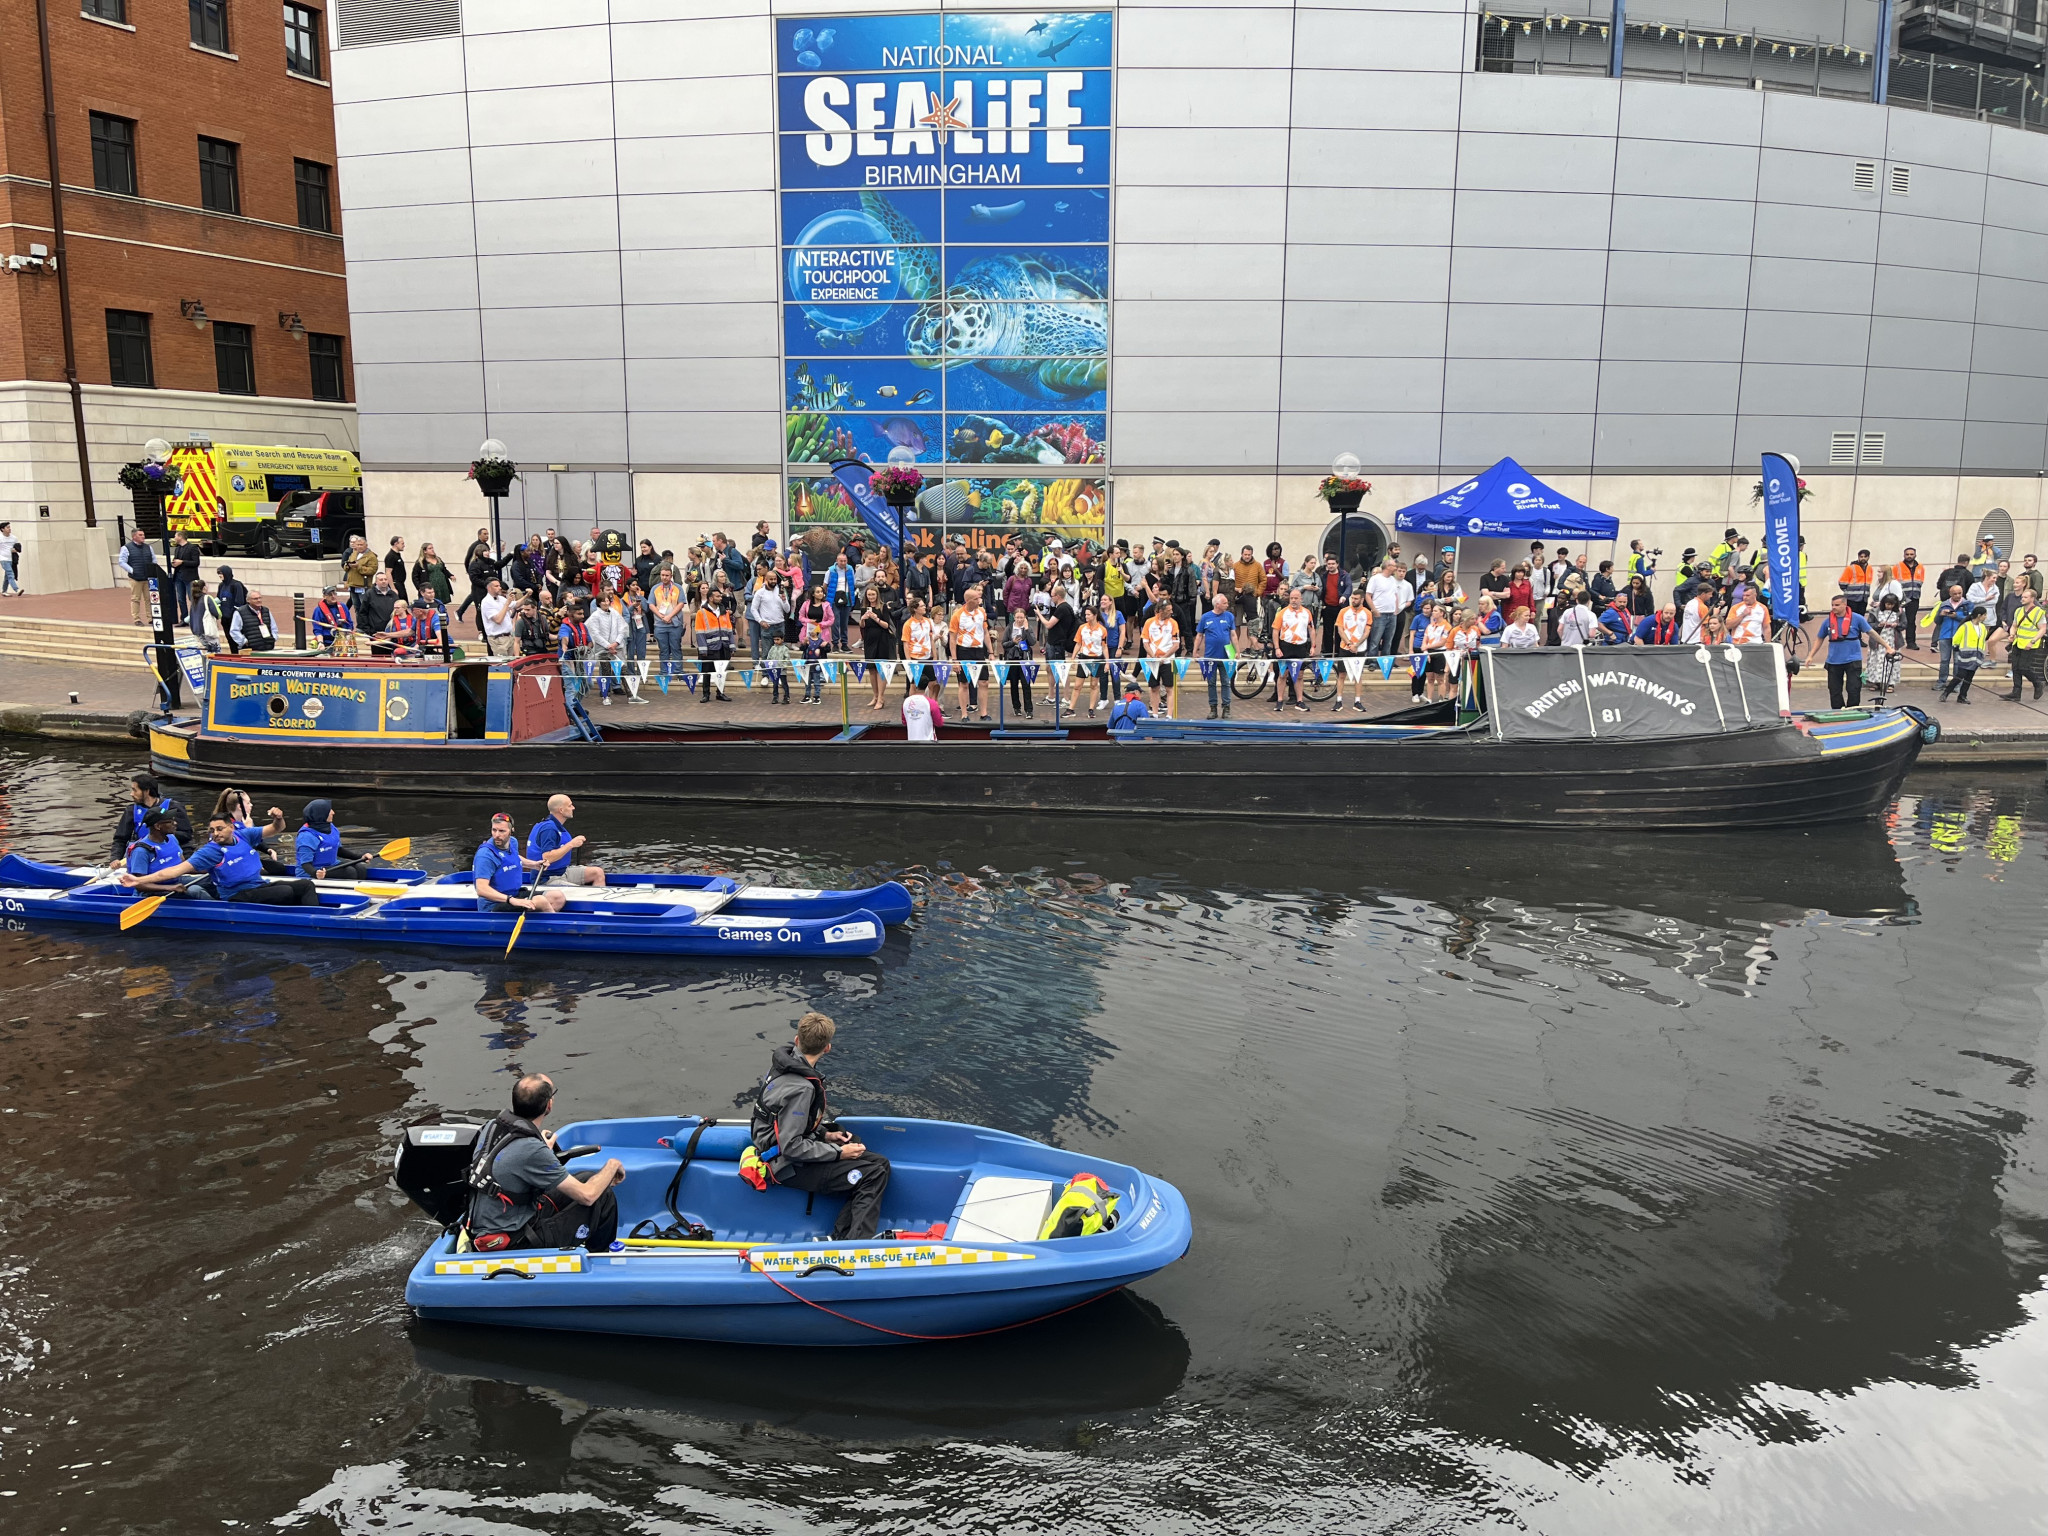 A procession of boats carried the Queen's Baton Relay through the canals of Birmingham ©ITG 